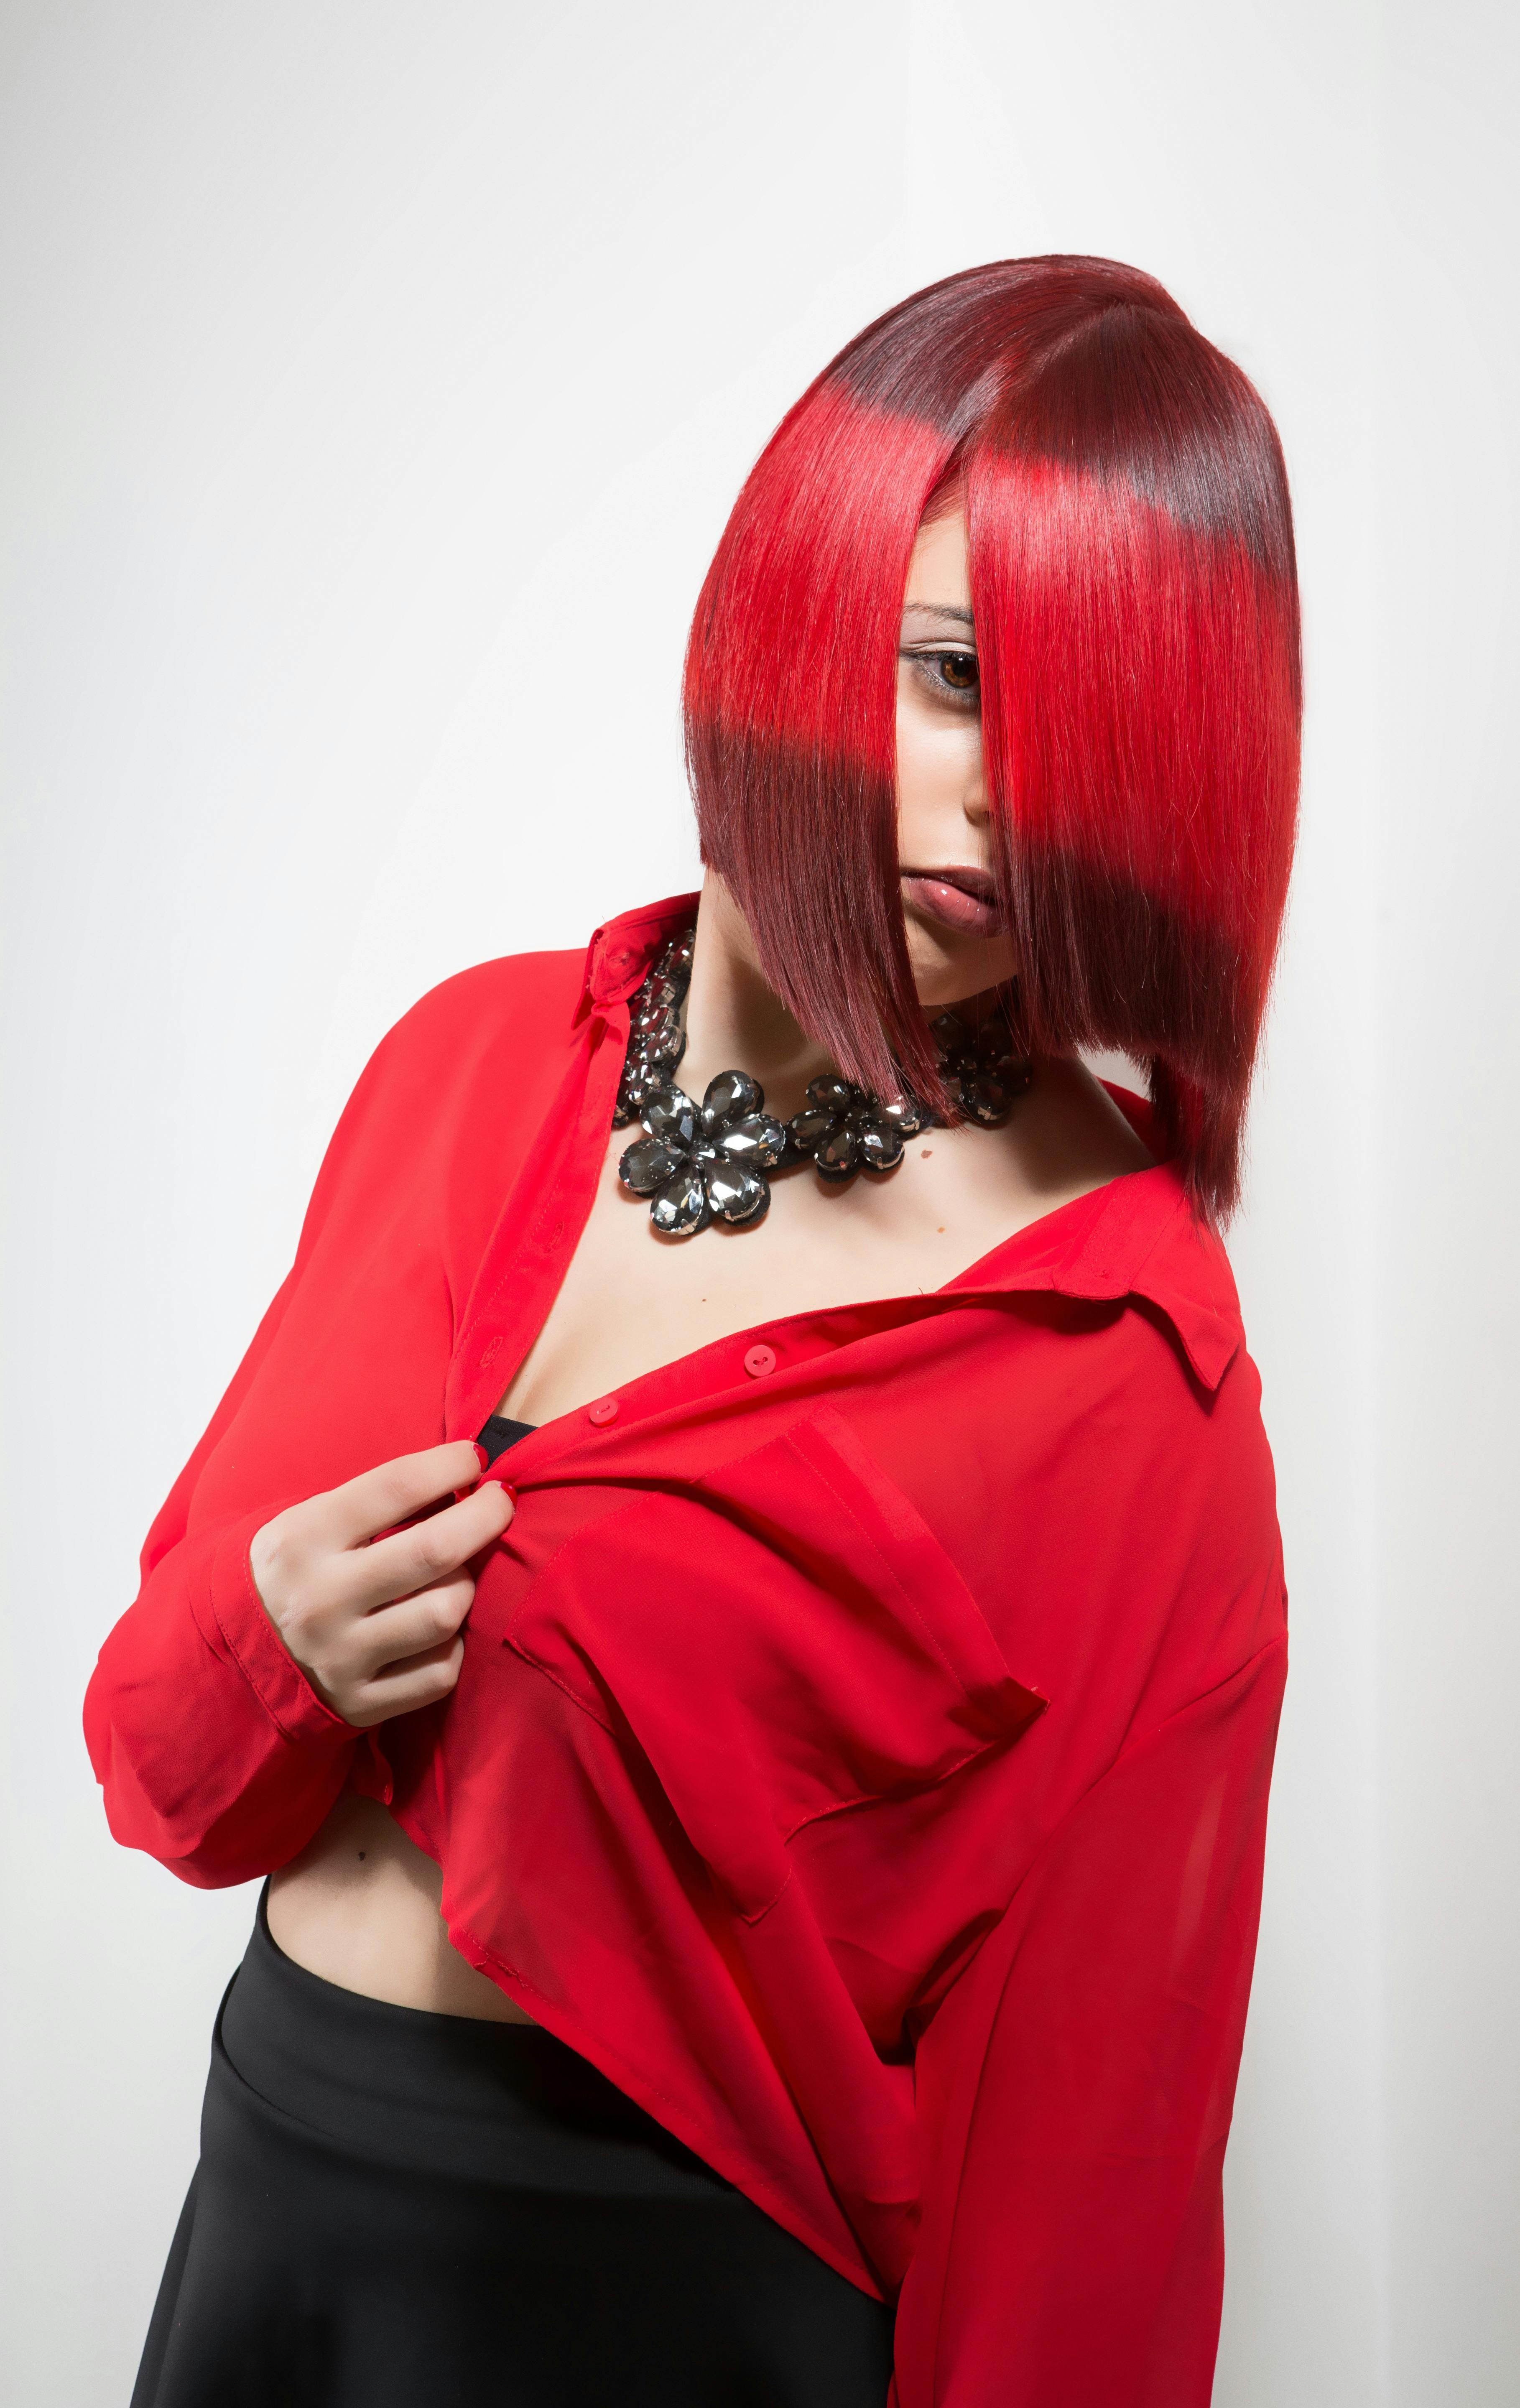 Hair Color Photos, Download The BEST Free Hair Color Stock Photos & HD  Images